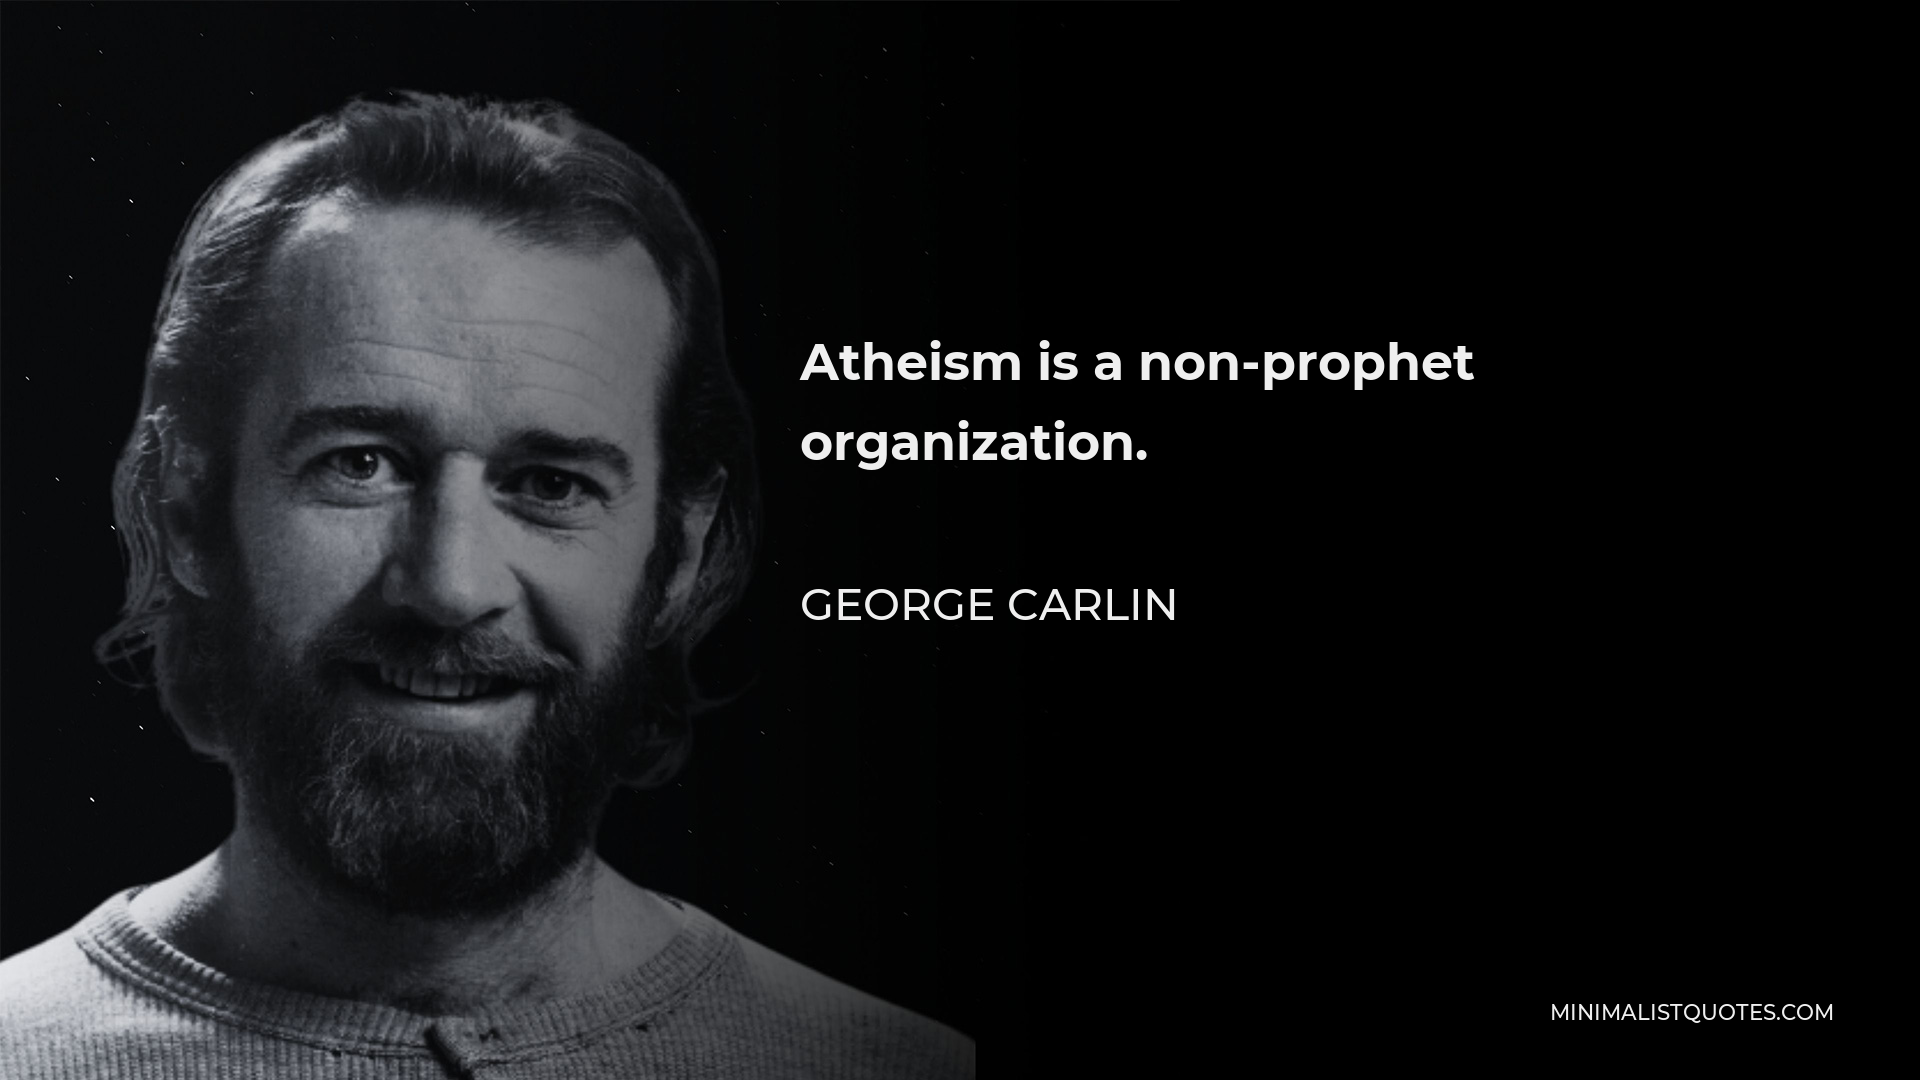 George Carlin Quote - Atheism is a non-prophet organization.